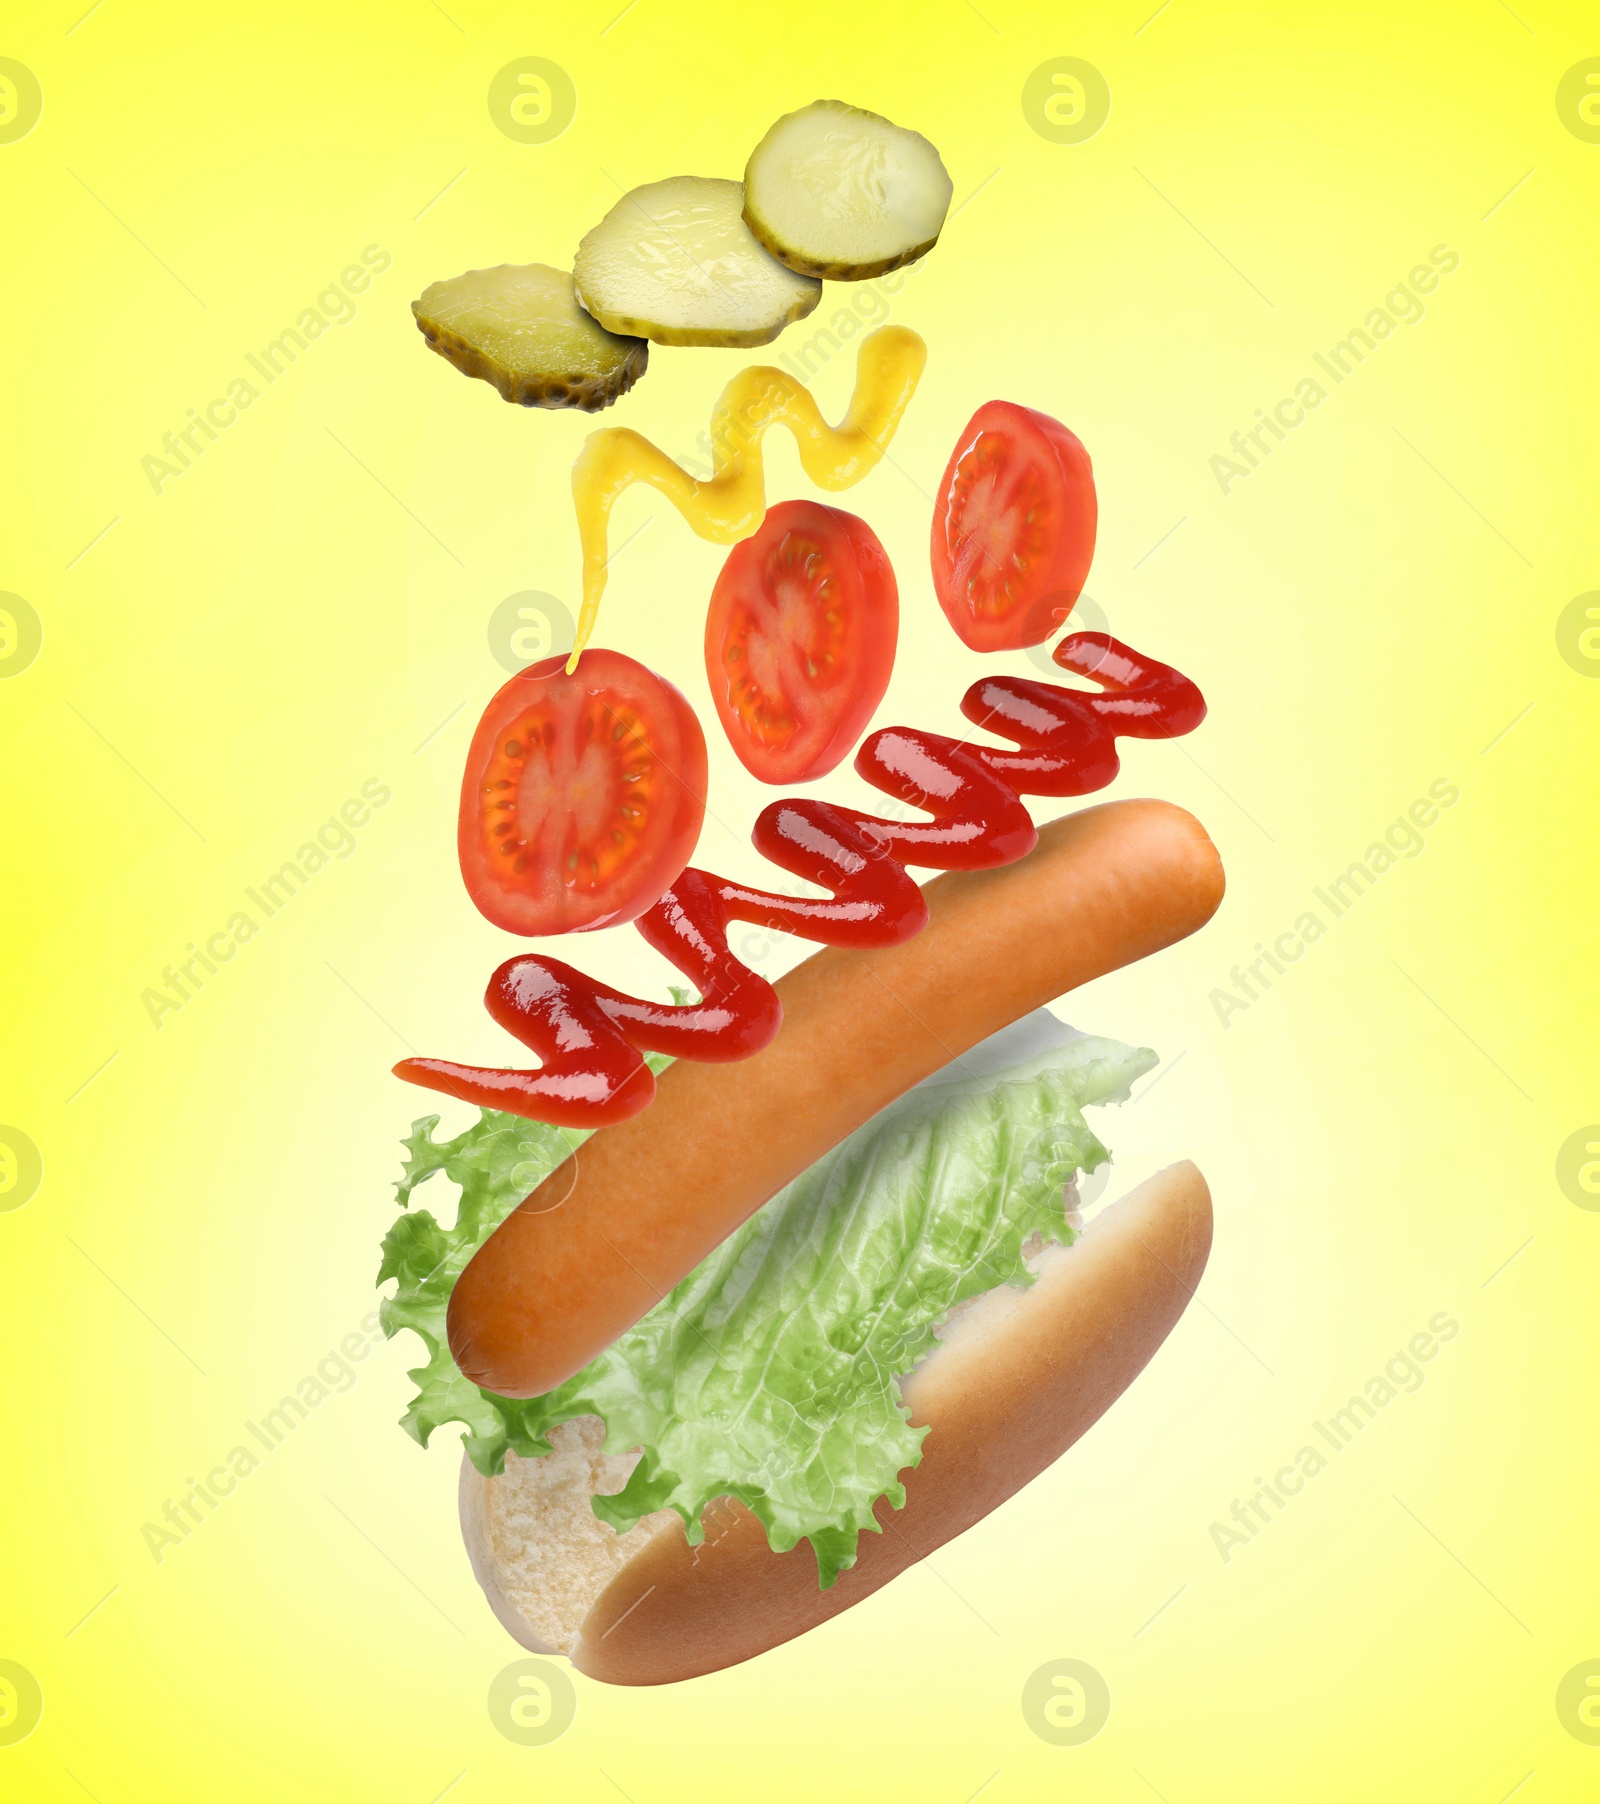 Image of Hot dog ingredients in air on yellow background